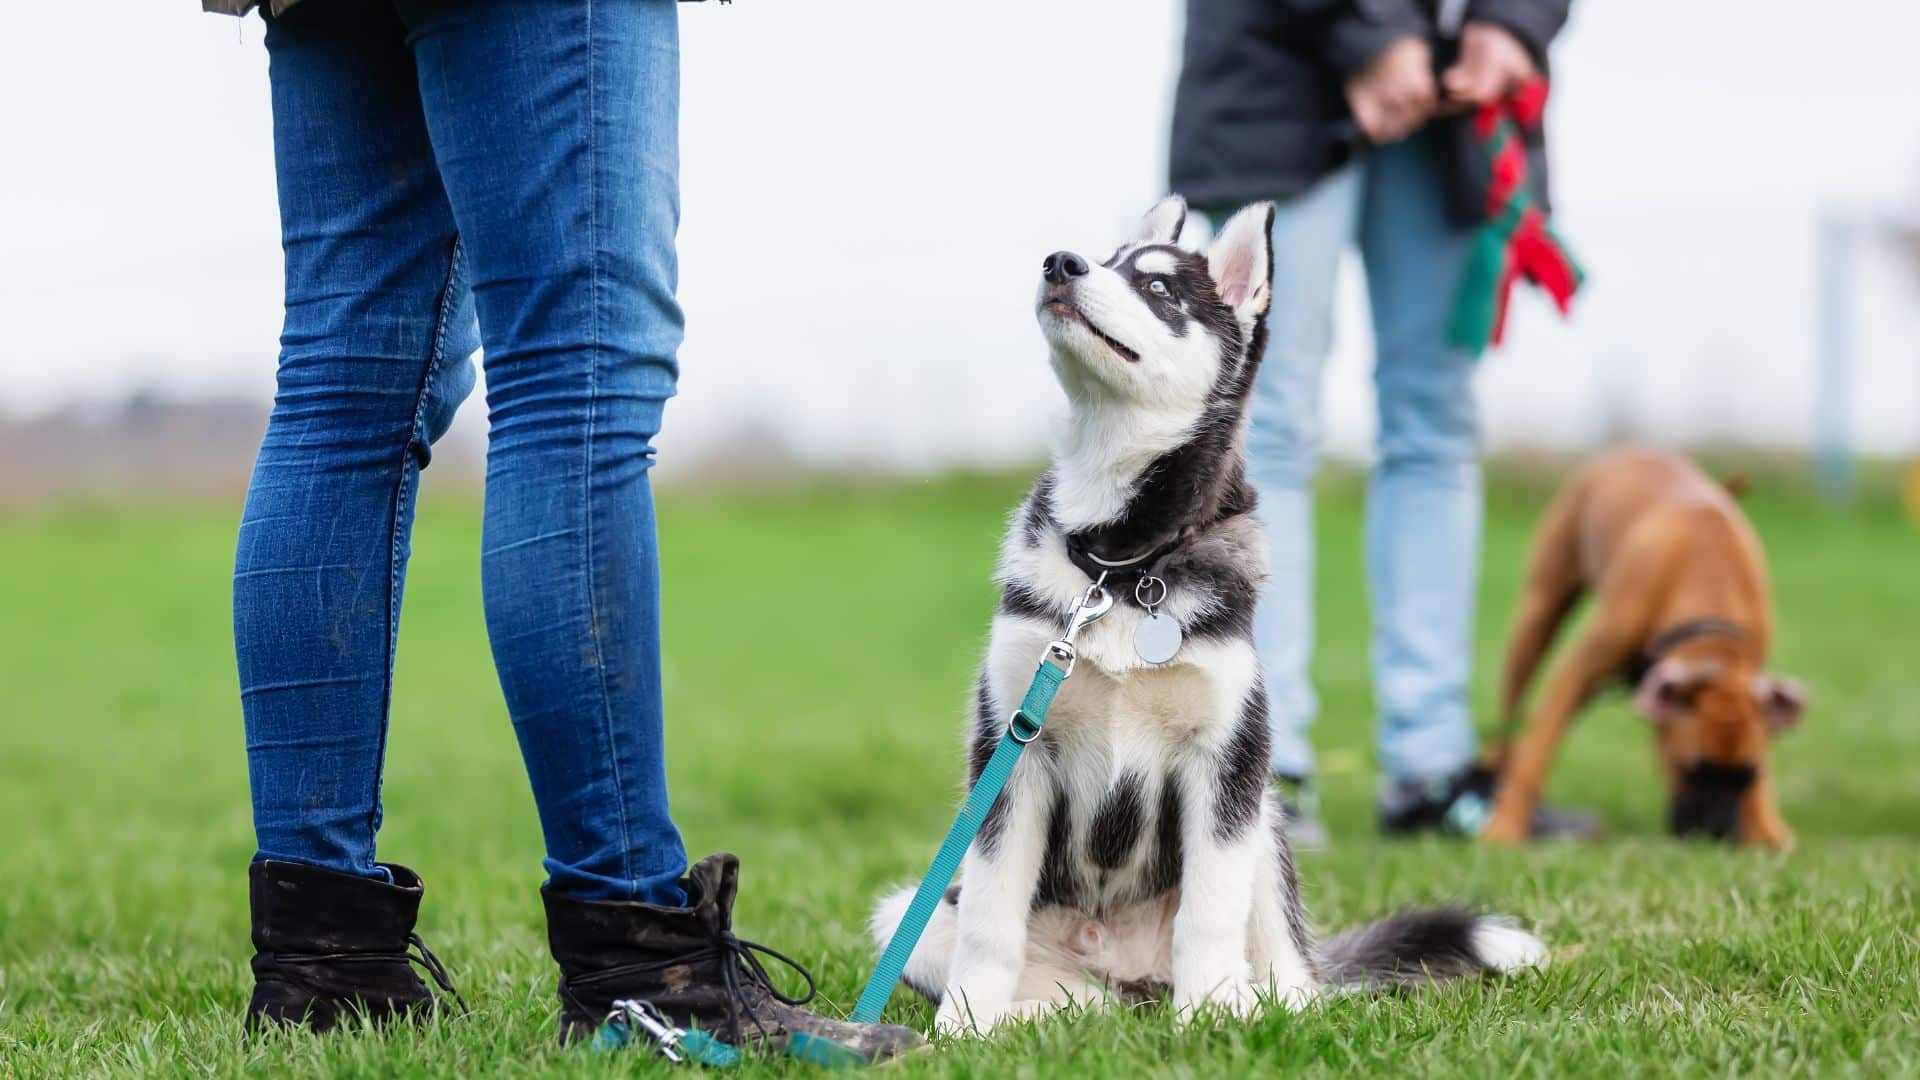 Promoting your dog walking business during the school year